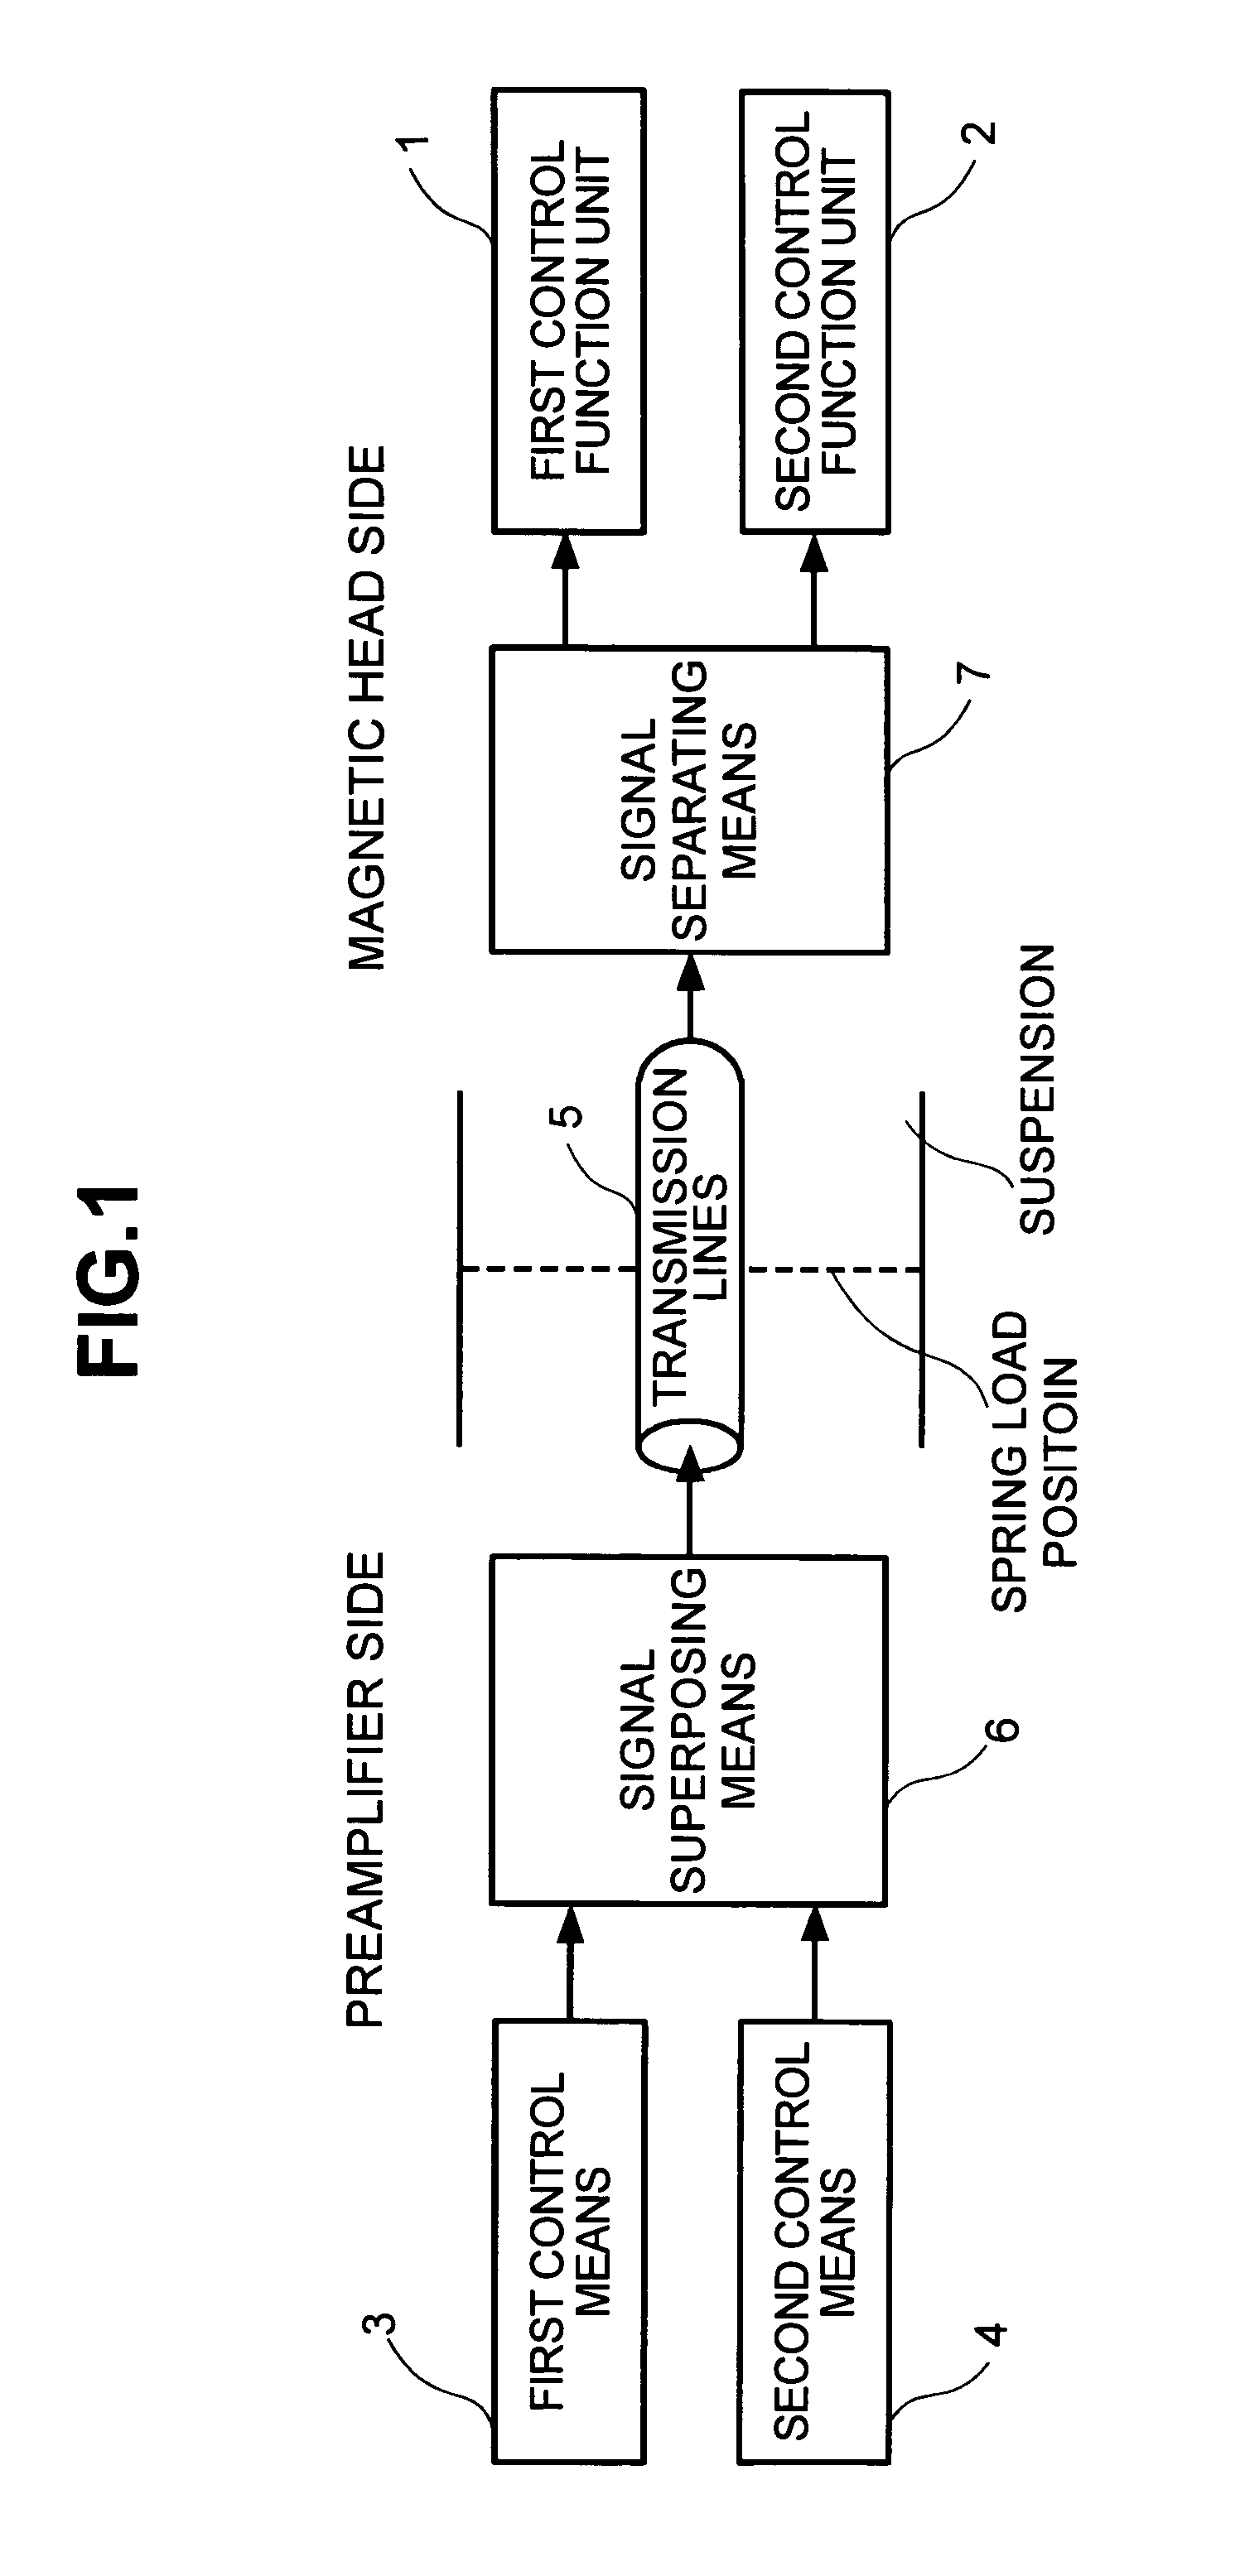 Magnetic disk drive reducing influence of rigidity of transmission lines on suspension